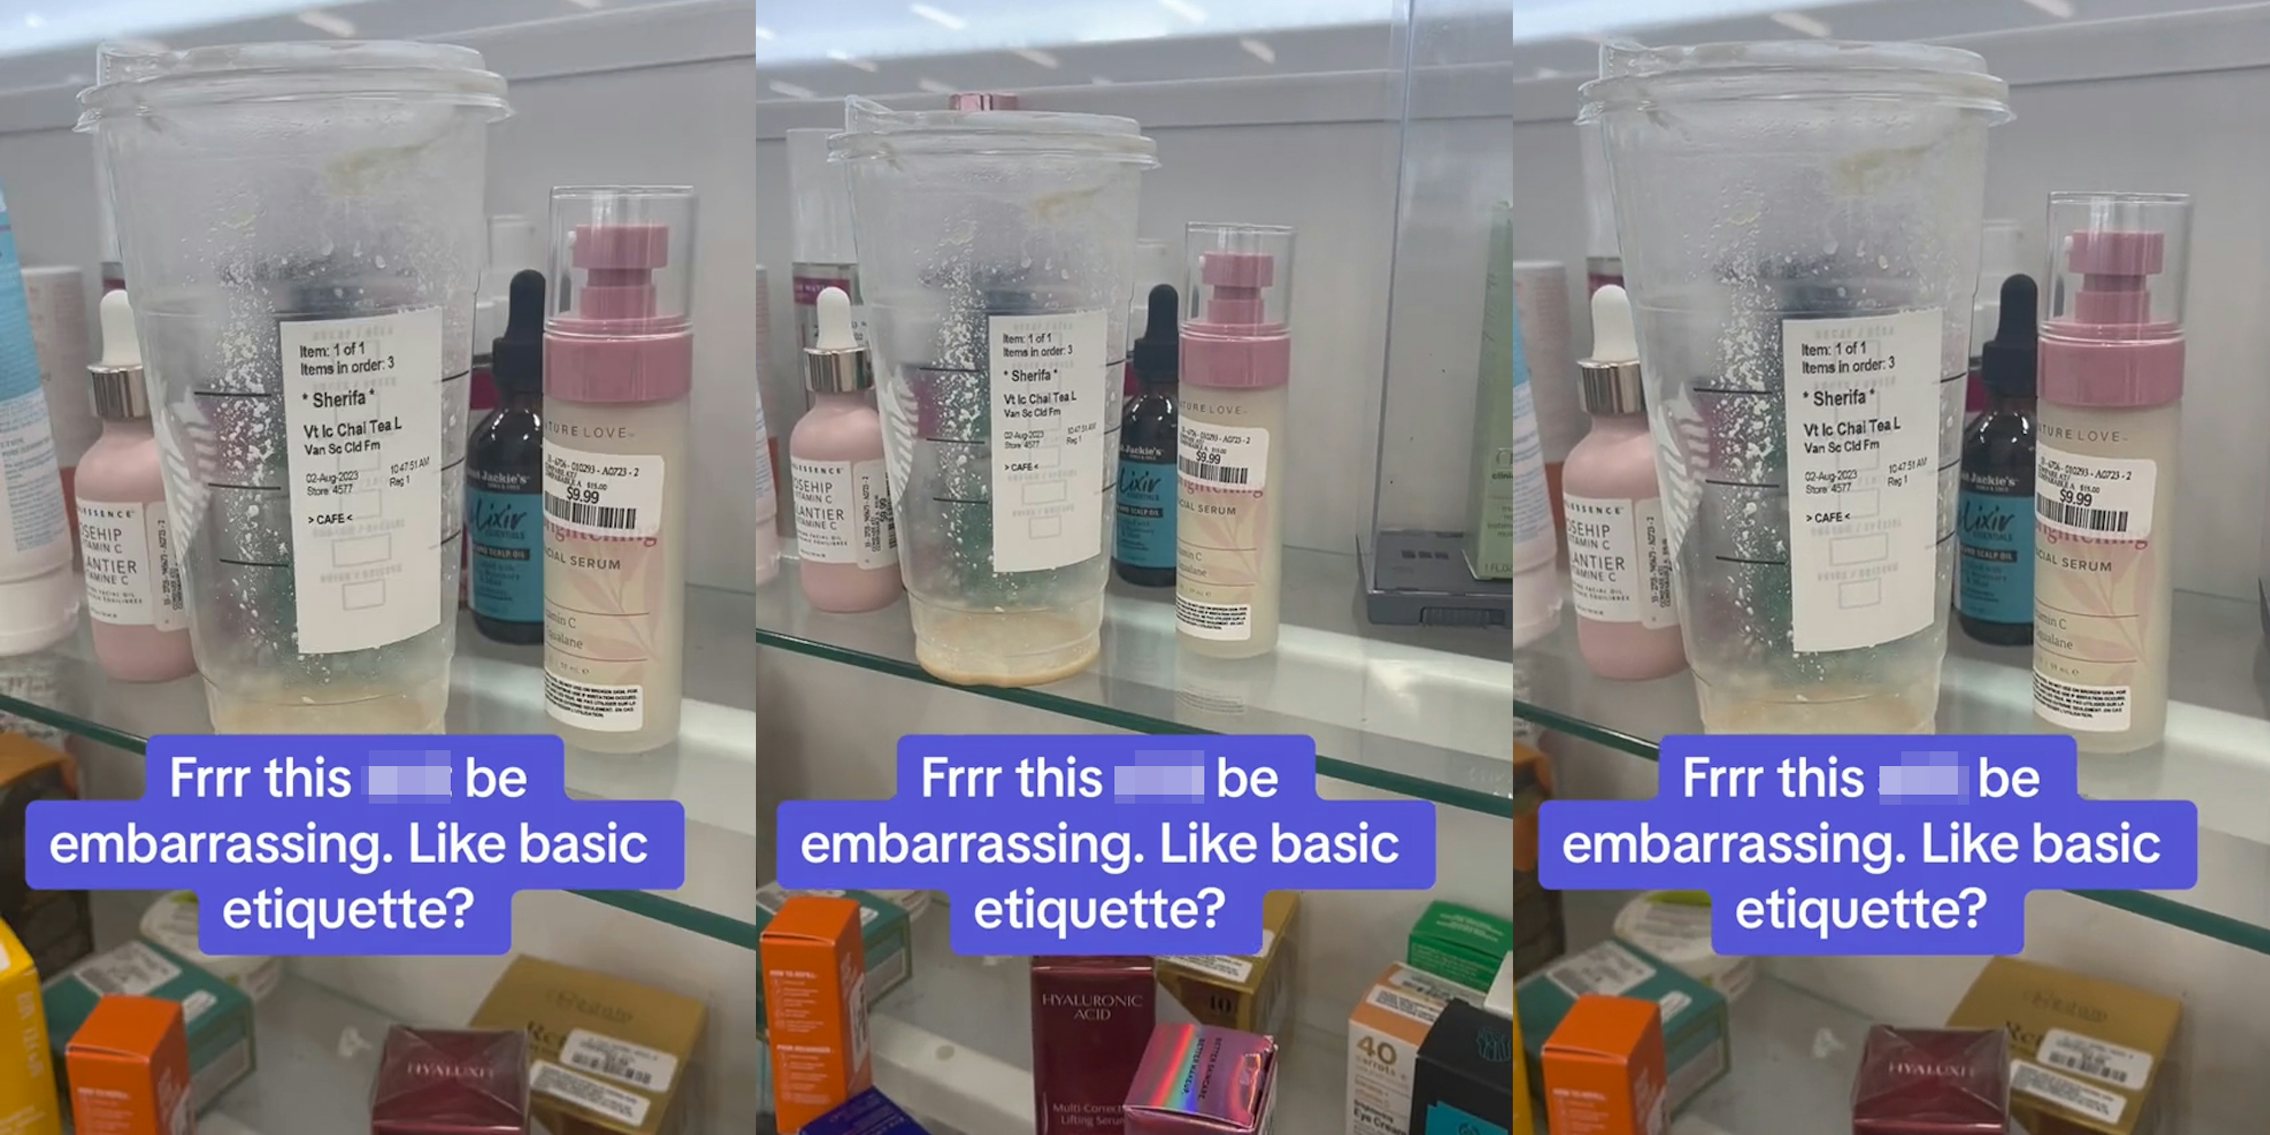 cup in store shelf with caption 'Frrr this blank be embarrassing. Like basic etiquette?' (l) cup in store shelf with caption 'Frrr this blank be embarrassing. Like basic etiquette?' (c) cup in store shelf with caption 'Frrr this blank be embarrassing. Like basic etiquette?' (r)